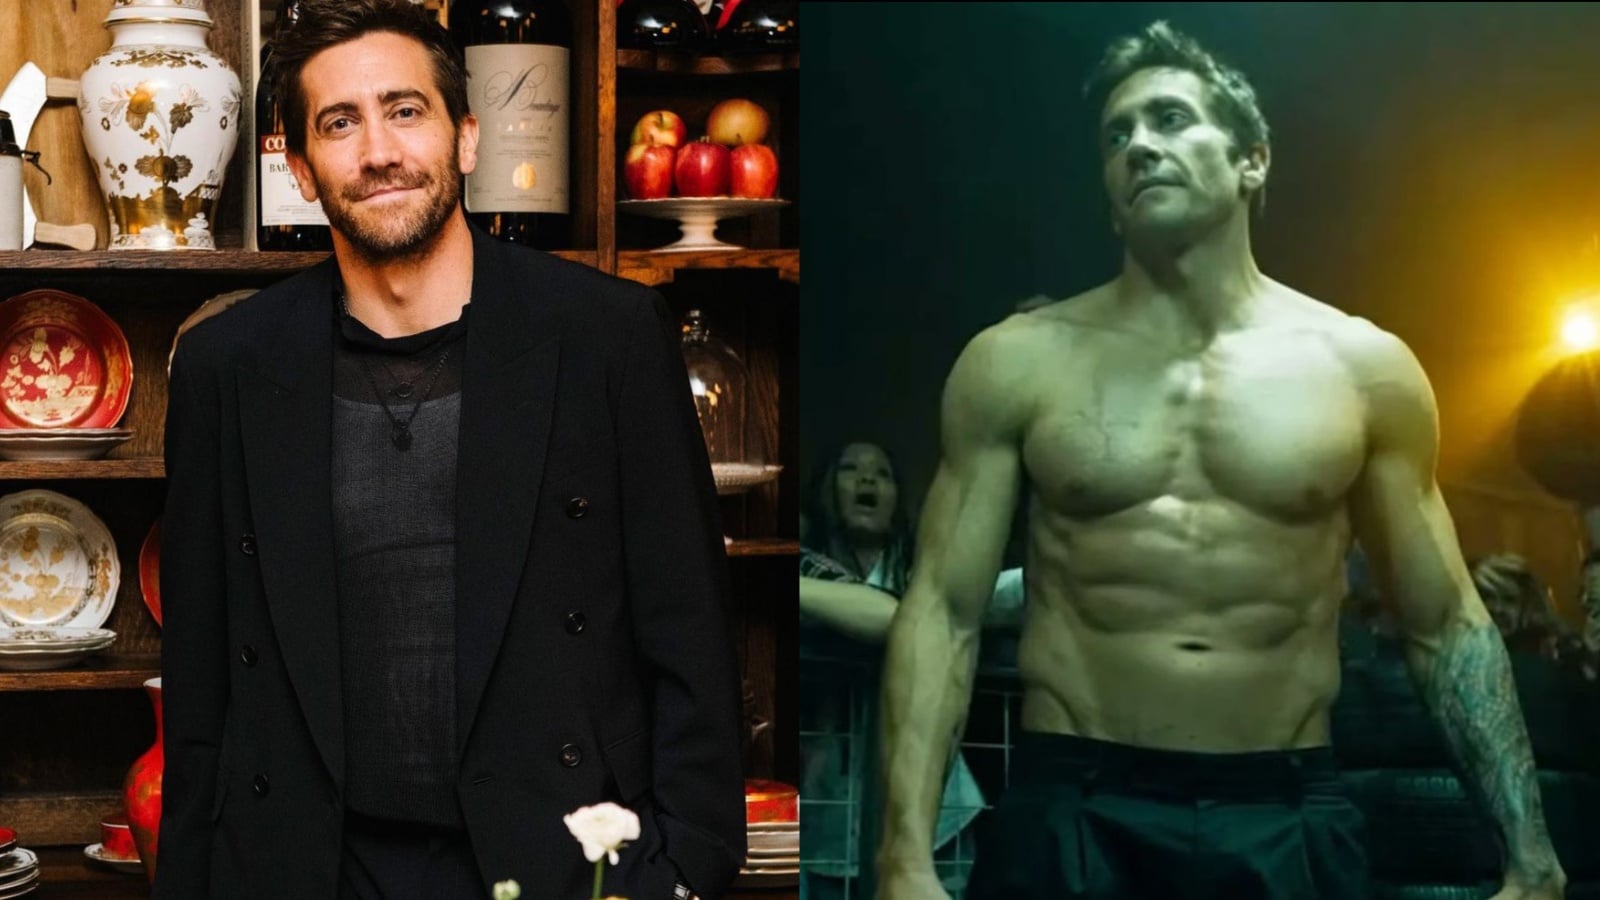 Jake Gyllenhaal is ripped in first look at remake of Patrick